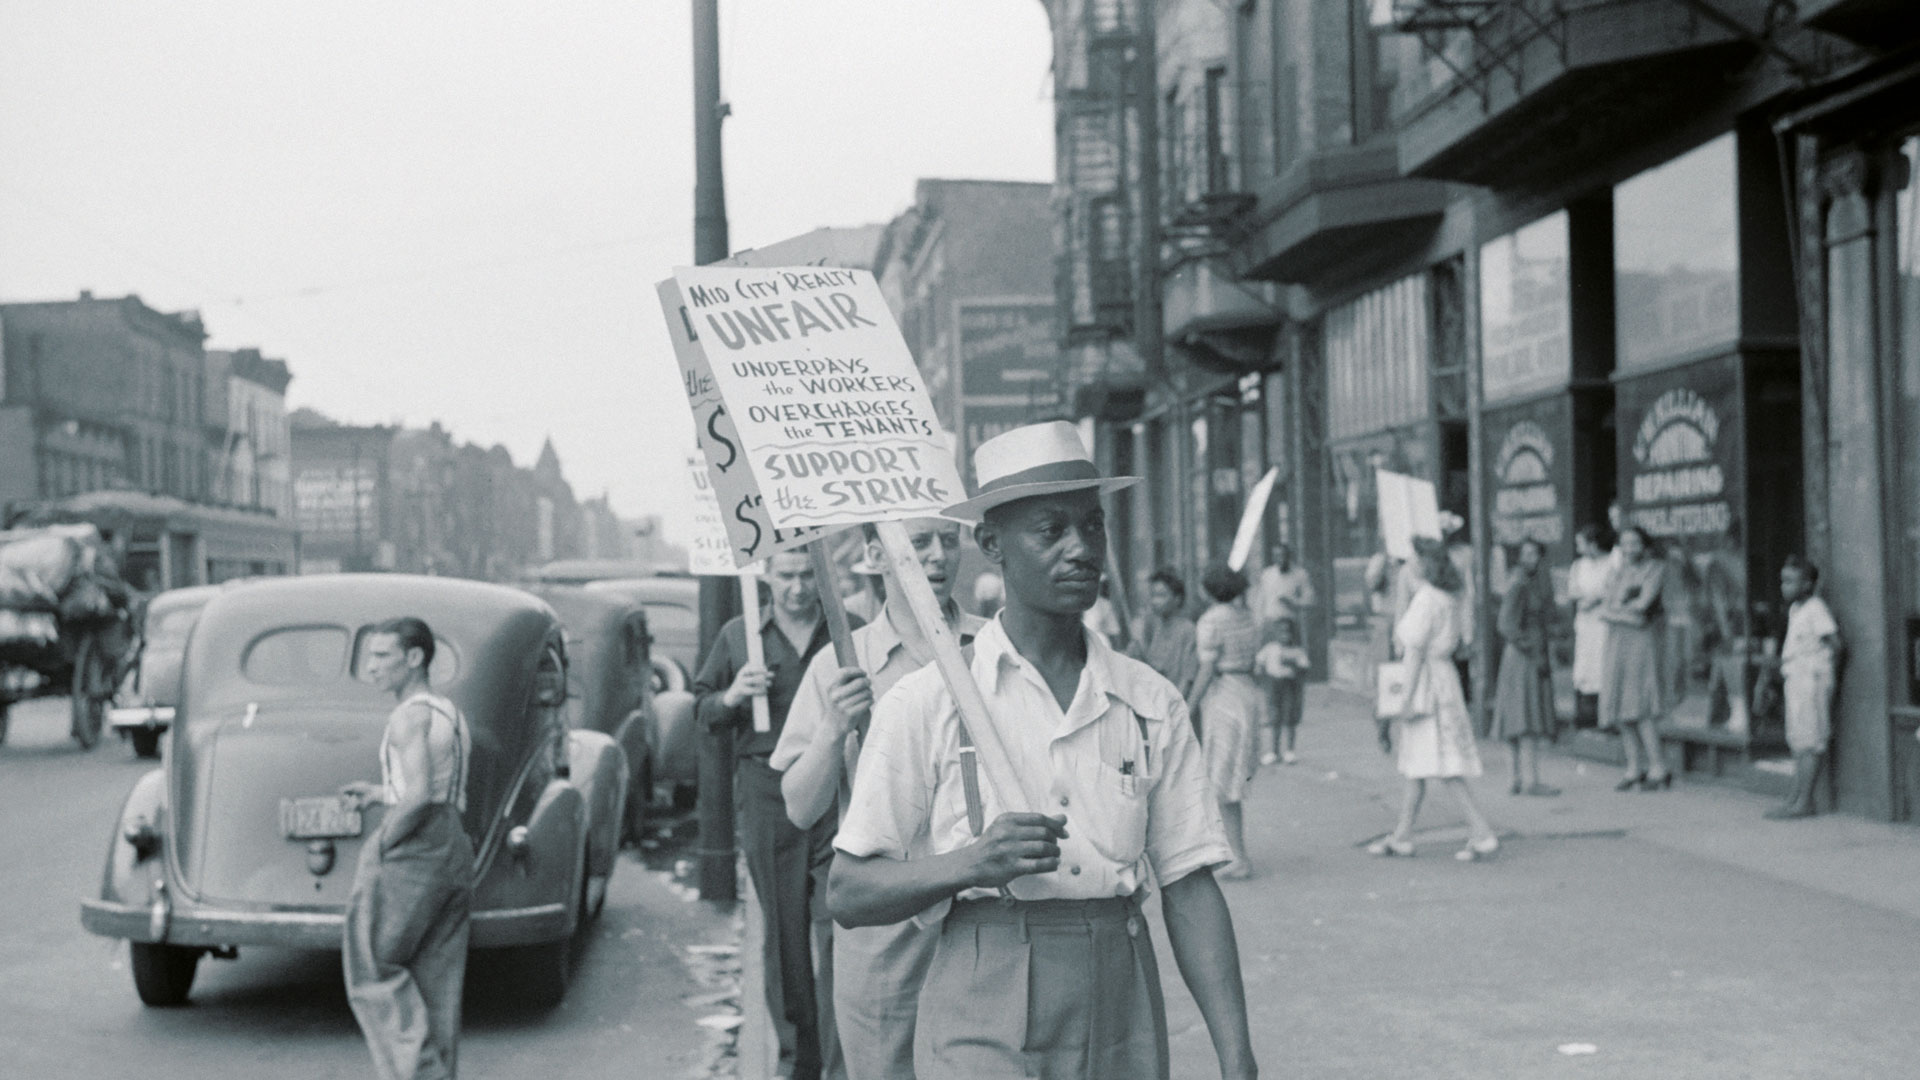 three men with picket boards walking down a street protesting with passers by in the background